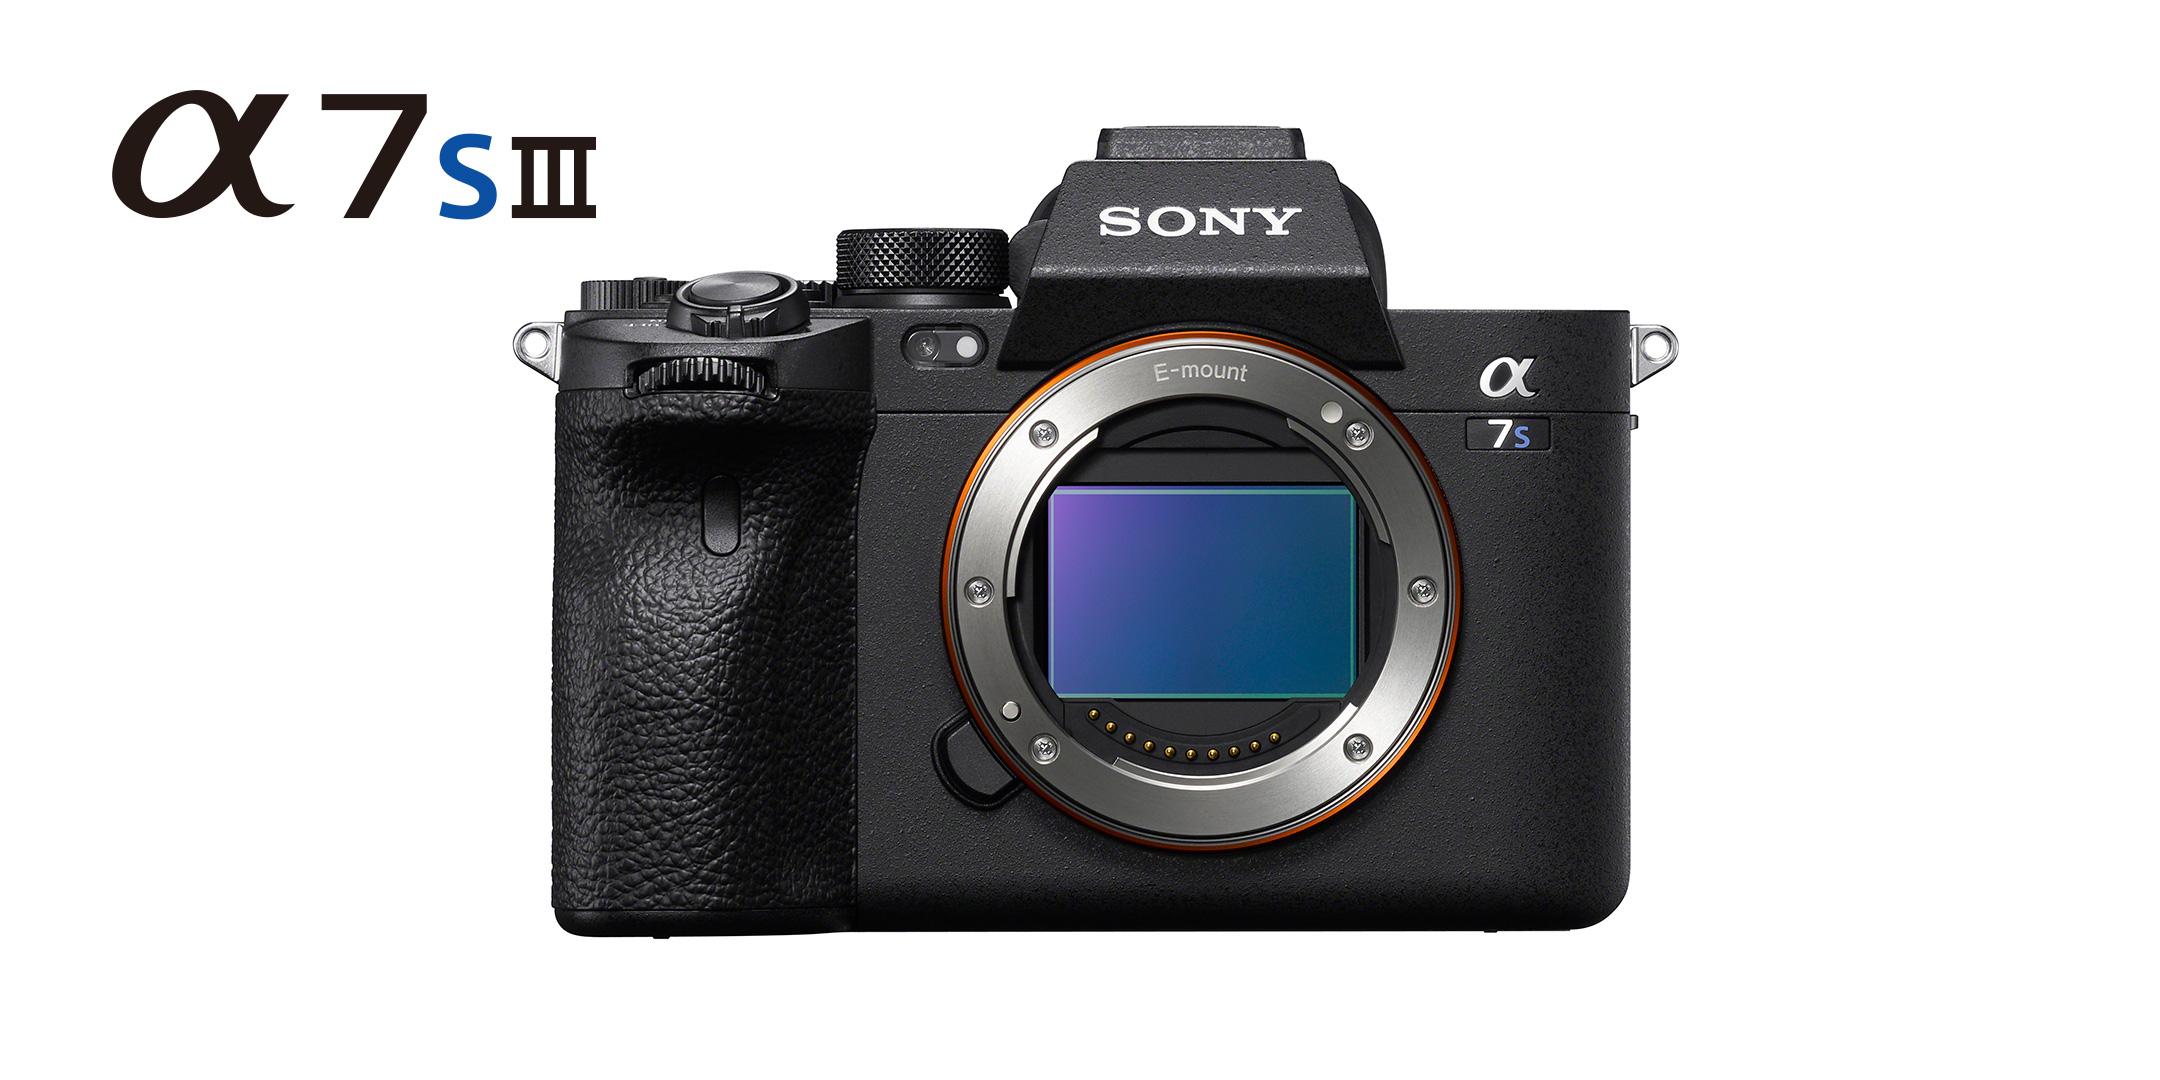 Meet the Sony a7SIII In Person! (By appointment only)